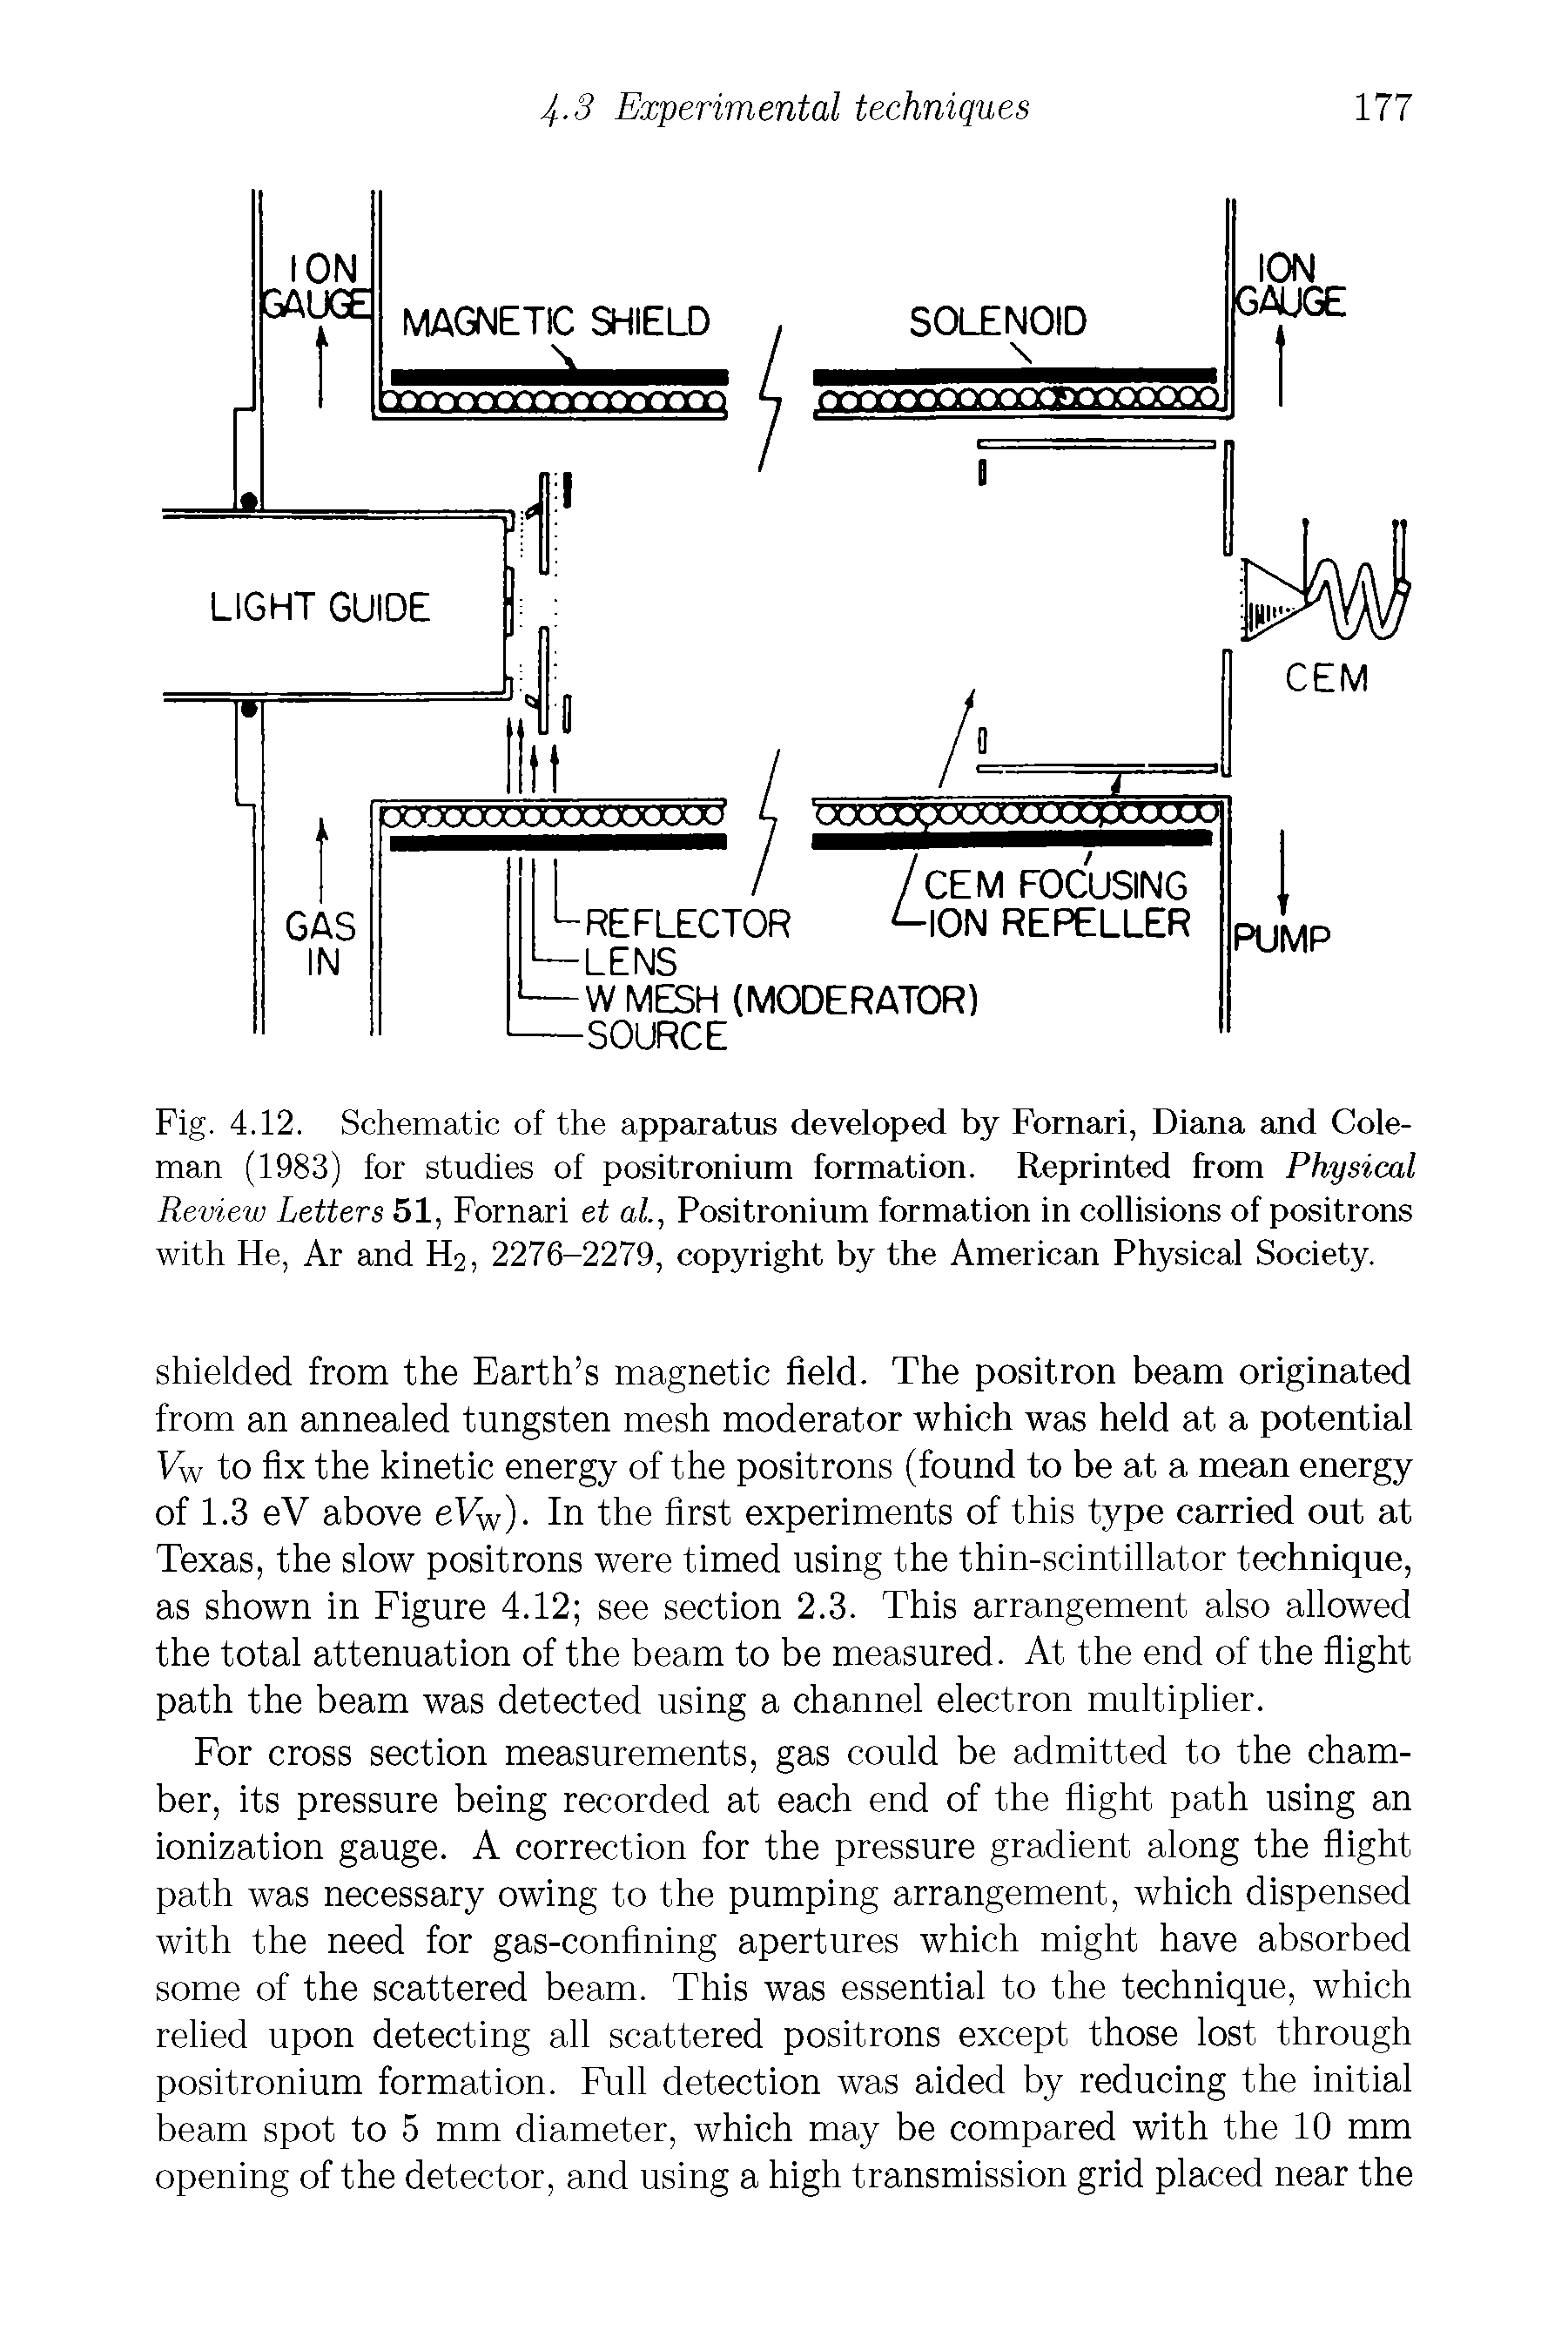 Fig. 4.12. Schematic of the apparatus developed by Fornari, Diana and Coleman (1983) for studies of positronium formation. Reprinted from Physical Review Letters 51, Fornari et al., Positronium formation in collisions of positrons with He, Ar and H2, 2276-2279, copyright by the American Physical Society.